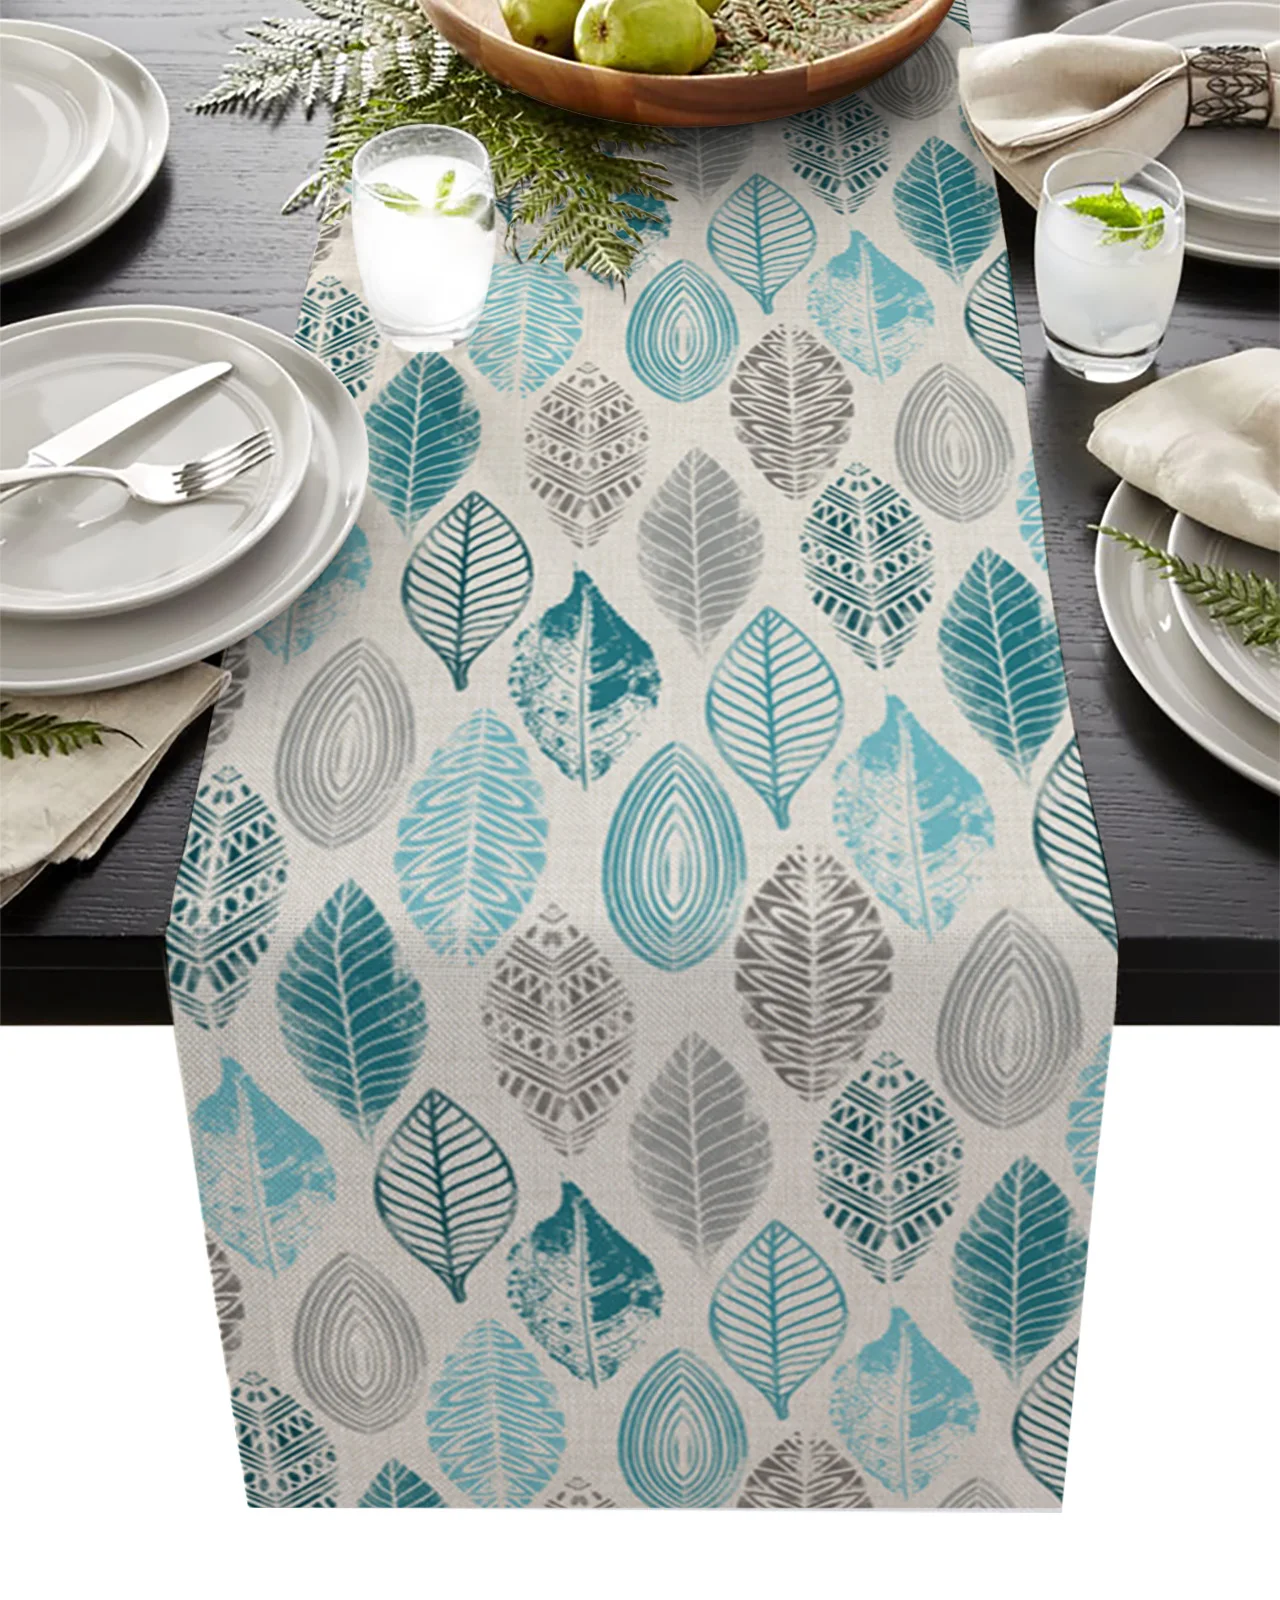 

Leaves Grey Teal Burlap Bottom Wedding Decor Table Runners Coffee Table Kitchen Dining Table Cloths Home Party Decor